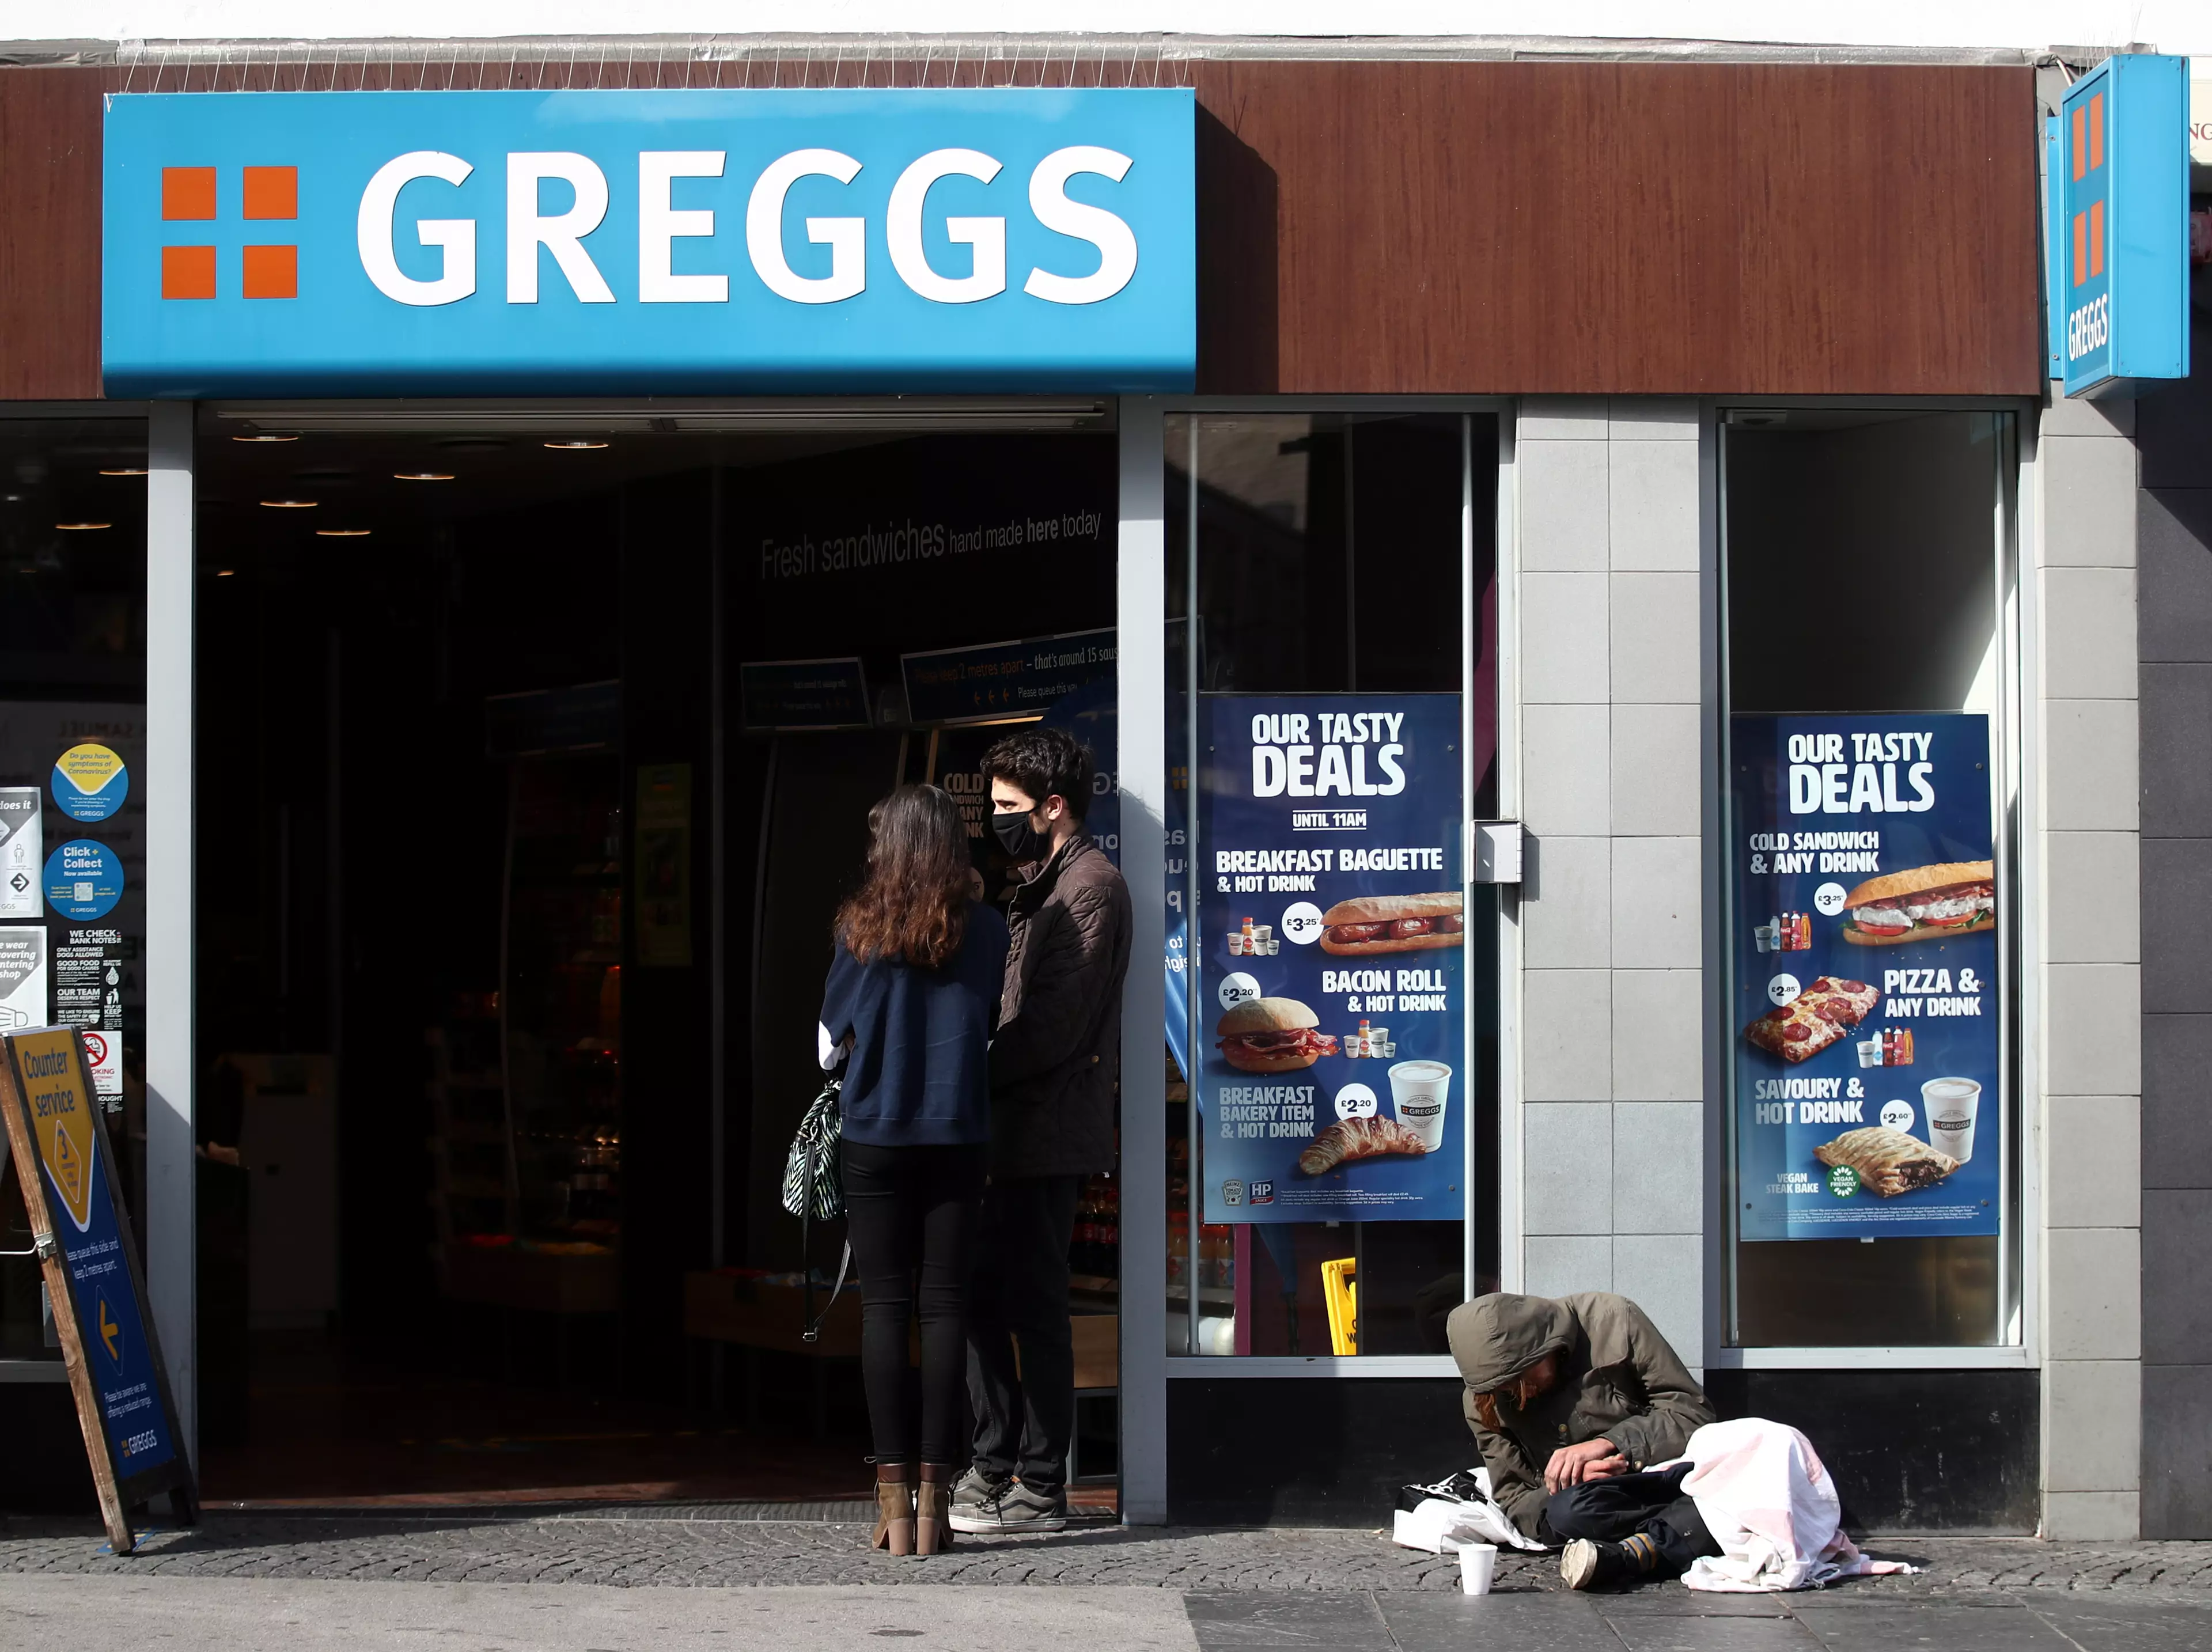 Get yourself down to Greggs ASAP (